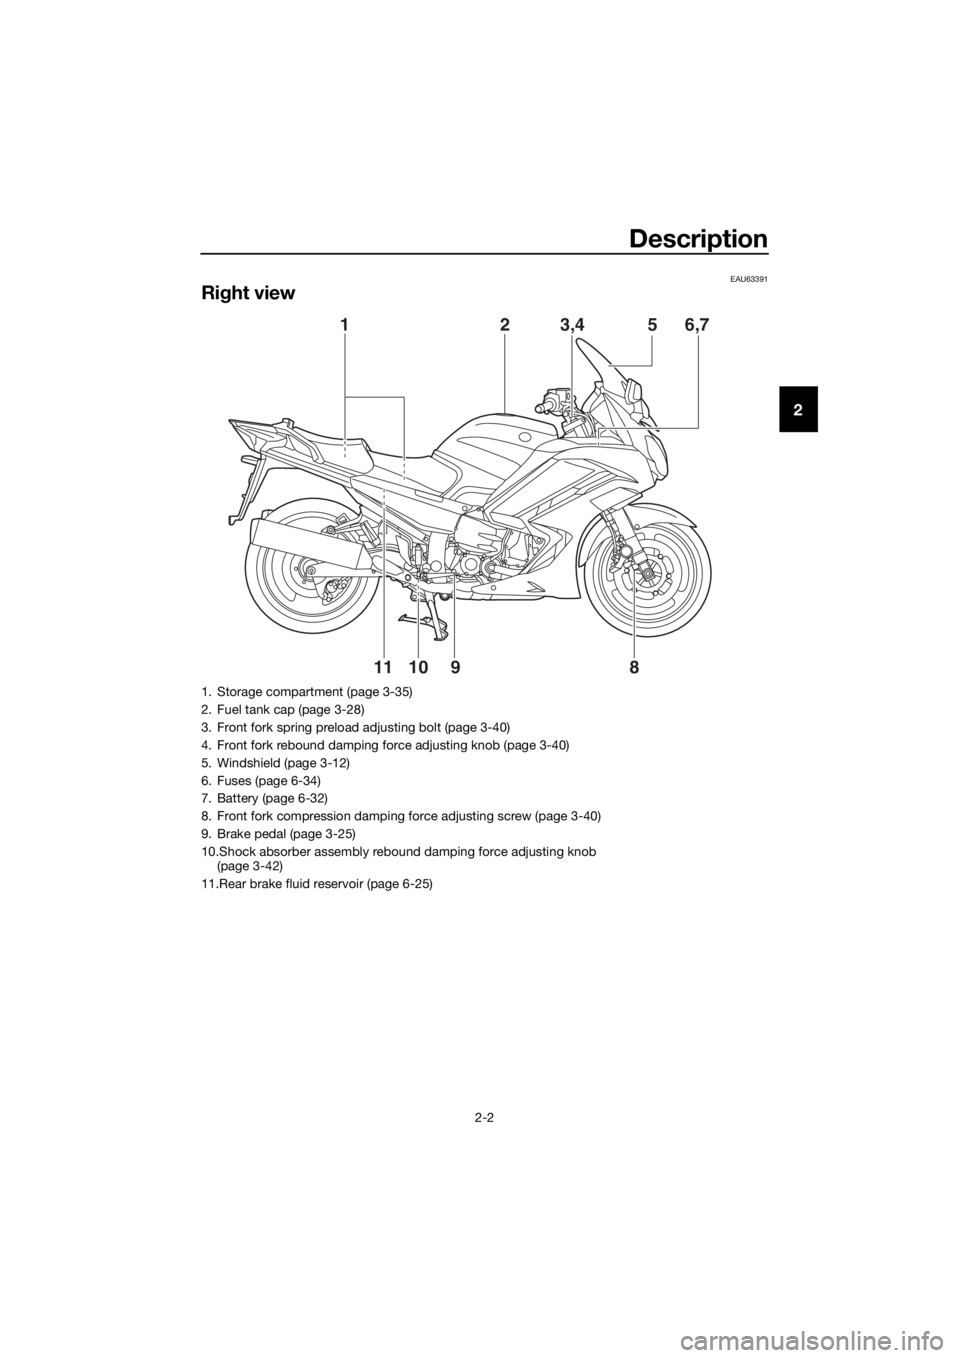 YAMAHA FJR1300A 2016  Owners Manual Description
2-2
2
EAU63391
Right view
891011 6,7
5
3,42
1
1. Storage compartment (page 3-35)
2. Fuel tank cap (page 3-28)
3. Front fork spring preload adjusting bolt (page 3-40)
4. Front fork rebound 